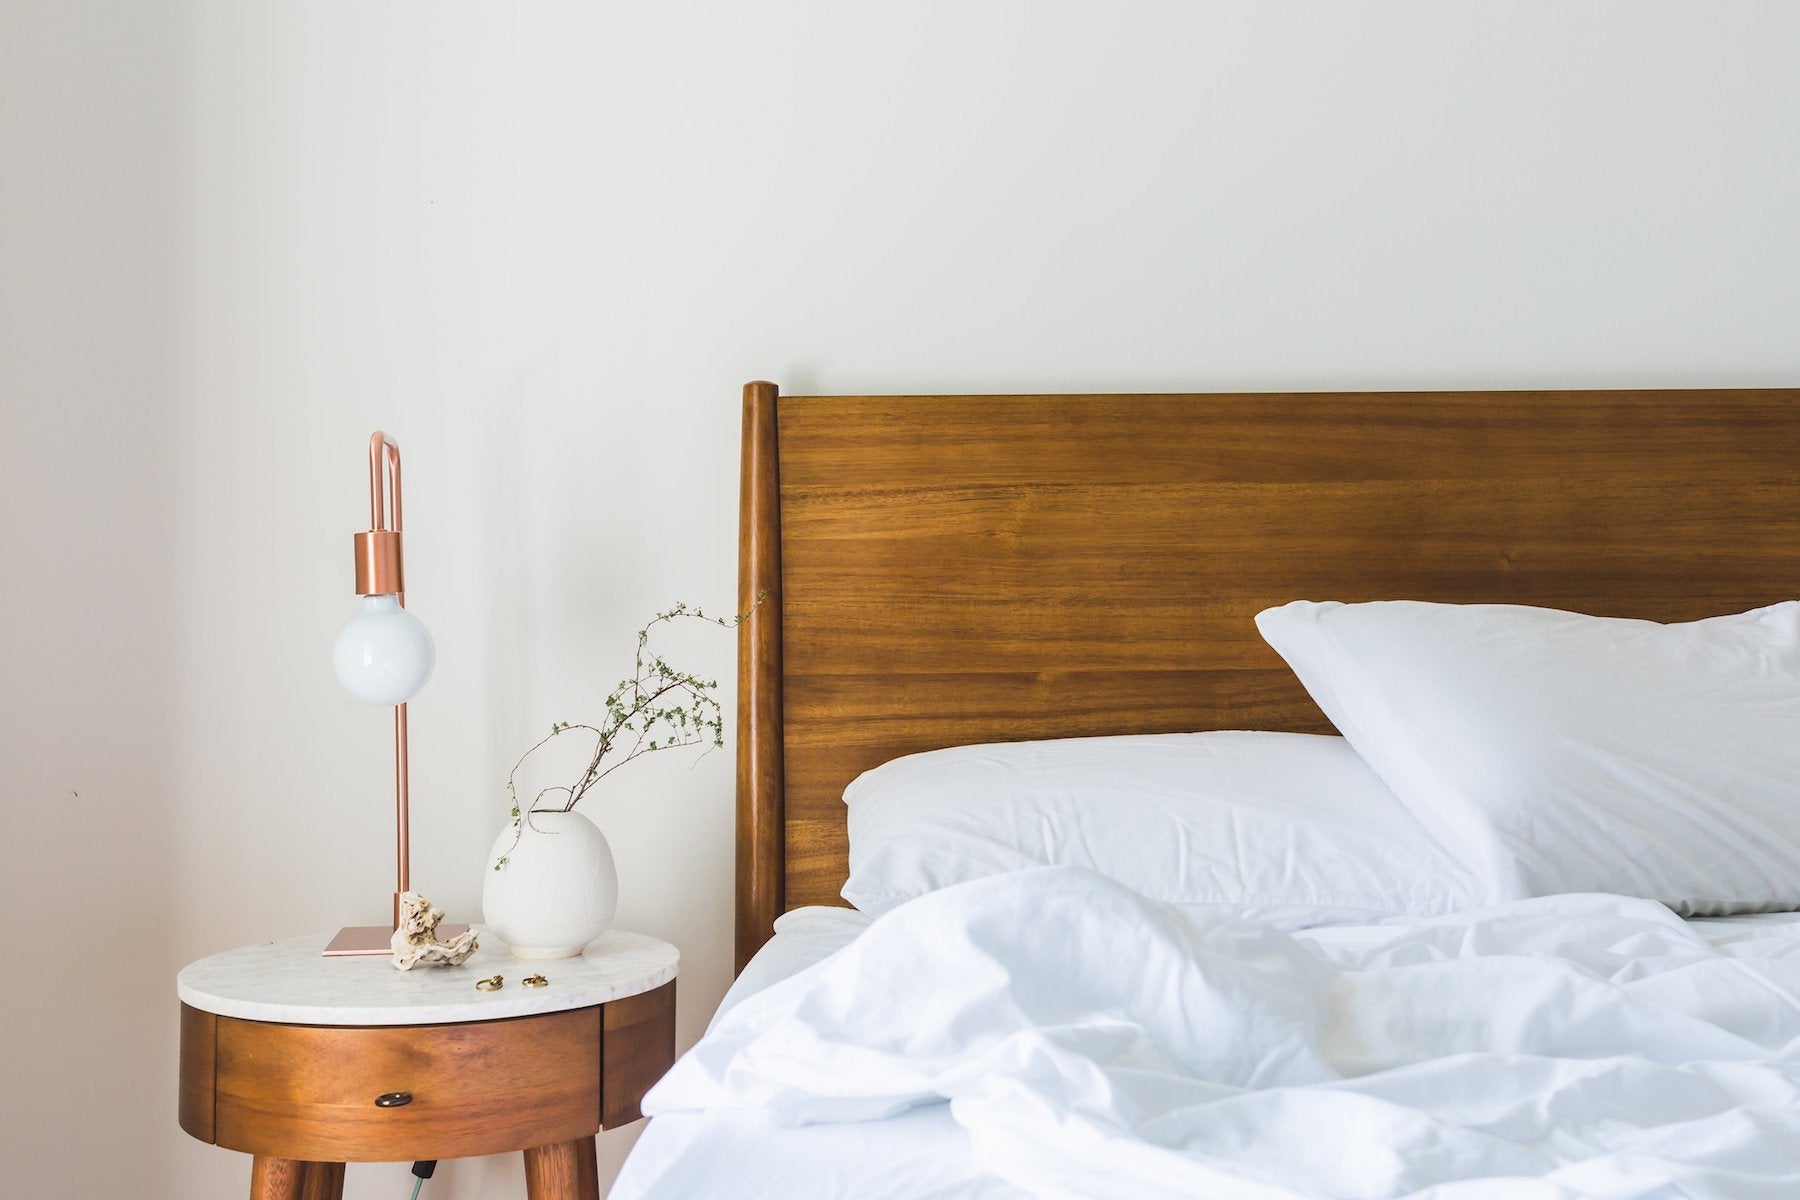 Five Bedroom Essentials for a Sound Sleep